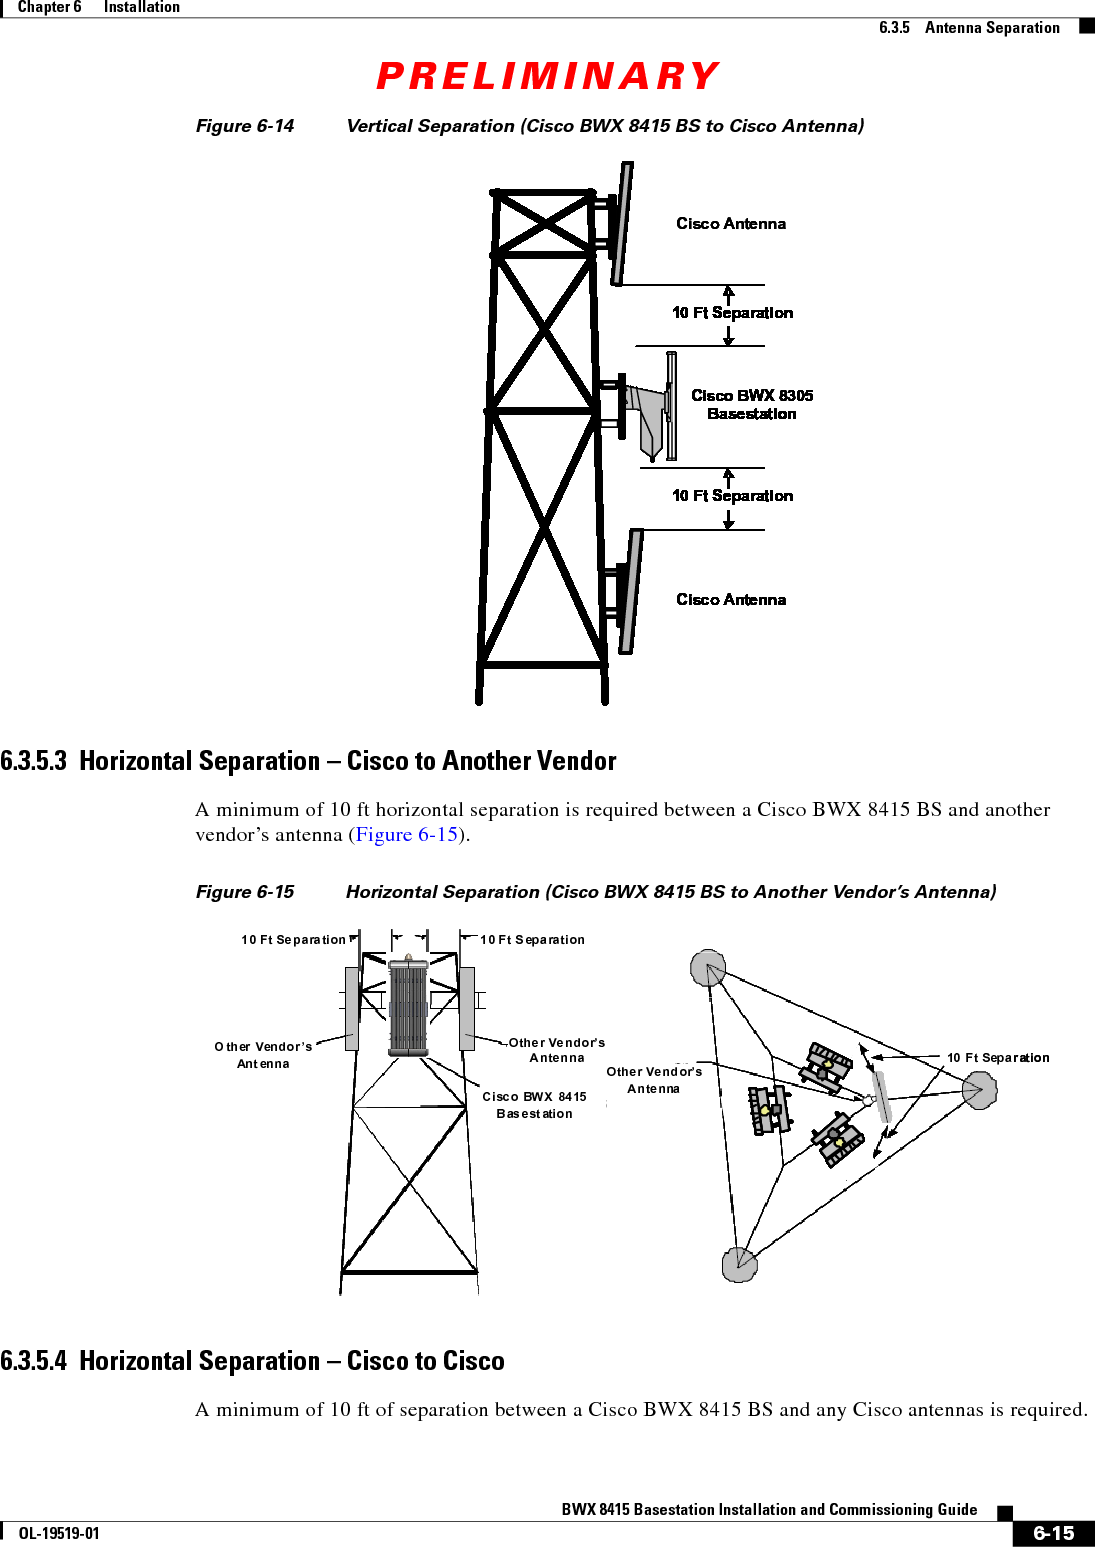 PRELIMINARY6-15BWX 8415 Basestation Installation and Commissioning GuideOL-19519-01Chapter 6      Installation6.3.5    Antenna SeparationFigure 6-14 Vertical Separation (Cisco BWX 8415 BS to Cisco Antenna)6.3.5.3  Horizontal Separation – Cisco to Another VendorA minimum of 10 ft horizontal separation is required between a Cisco BWX 8415 BS and another vendor’s antenna (Figure 6-15).Figure 6-15 Horizontal Separation (Cisco BWX 8415 BS to Another Vendor’s Antenna)6.3.5.4  Horizontal Separation – Cisco to CiscoA minimum of 10 ft of separation between a Cisco BWX 8415 BS and any Cisco antennas is required. 10 Ft Separation10 Ft Separation10 Ft Separation10 Ft Separation10 Ft Separation10 Ft Separation10 Ft Separation10 Ft Separation10 Ft Separation10 Ft Separation10 Ft Separation10 Ft Separation10 Ft Separation10 Ft Separation10 Ft Separation10 Ft Separation10 Ft Separation10 Ft Separation10 Ft Separation10 Ft Separation10 Ft Separation10 Ft Separation10 Ft Separation10 Ft SeparationCisco BWX 8305BasestationBasestationBasestationBasestationBasestationBasestationBasestationBasestationBasestationBasestationBasestationBasestationCisco Antenna10 Ft Separation10 Ft Separation10 Ft Separation10 Ft Separation10 Ft Separation10 Ft Separation10 Ft Separation10 Ft Separation10 Ft Separation10 Ft Separation10 Ft Separation10 Ft Separation10 Ft Separation10 Ft Separation10 Ft Separation10 Ft Separation10 Ft Separation10 Ft Separation10 Ft Separation10 Ft Separation10 Ft Separation10 Ft Separation10 Ft Separation10 Ft SeparationCisco BWX 8305BasestationBasestationBasestationBasestationBasestationBasestationBasestationBasestationBasestationBasestationBasestationBasestationCisco AntennaCisco Antenna10 Ft Separation10 Ft Separation10 Ft Separation10 Ft Separation10 Ft Separation10 Ft Separation10 Ft Separation10 Ft Separation10 Ft Separation10 Ft Separation10 Ft Separation10 Ft Separation10 Ft Separation10 Ft Separation10 Ft Separation10 Ft Separation10 Ft Separation10 Ft Separation10 Ft Separation10 Ft Separation10 Ft Separation10 Ft Separation10 Ft Separation10 Ft Separation10 Ft Separation10 Ft Separation10 Ft Separation10 Ft Separation10 Ft Separation10 Ft Separation10 Ft Separation10 Ft Separation10 Ft Separation10 Ft Separation10 Ft Separation10 Ft Separation10 Ft Separation10 Ft Separation10 Ft Separation10 Ft Separation10 Ft Separation10 Ft Separation10 Ft Separation10 Ft Separation10 Ft Separation10 Ft Separation10 Ft Separation10 Ft SeparationCisco BWX 8305BasestationBasestationBasestationBasestationBasestationBasestationBasestationBasestationBasestationBasestationBasestationBasestationCisco BWX 8305BasestationBasestationBasestationBasestationBasestationBasestationBasestationBasestationBasestationBasestationBasestationBasestationCisco Antenna10 Ft Separation10 Ft Separation10 Ft Separation10 Ft Separation10 Ft Separation10 Ft Separation10 Ft Separation10 Ft Separation10 Ft Separation10 Ft Separation10 Ft Separation10 Ft Separation10 Ft Separation10 Ft Separation10 Ft Separation10 Ft Separation10 Ft Separation10 Ft Separation10 Ft Separation10 Ft Separation10 Ft Separation10 Ft Separation10 Ft Separation10 Ft SeparationCisco BWX 8305BasestationBasestationBasestationBasestationBasestationBasestationBasestationBasestationBasestationBasestationBasestationBasestationCisco Antenna10 Ft Separation10 Ft Separation10 Ft Separation10 Ft Separation10 Ft Separation10 Ft Separation10 Ft Separation10 Ft Separation10 Ft Separation10 Ft Separation10 Ft Separation10 Ft Separation10 Ft Separation10 Ft Separation10 Ft Separation10 Ft Separation10 Ft Separation10 Ft Separation10 Ft Separation10 Ft Separation10 Ft Separation10 Ft Separation10 Ft Separation10 Ft SeparationCisco BWX 8305BasestationBasestationBasestationBasestationBasestationBasestationBasestationBasestationBasestationBasestationBasestationBasestationCisco Antenna10 Ft Separation10 Ft Separation10 Ft Separation10 Ft Separation10 Ft Separation10 Ft Separation10 Ft Separation10 Ft Separation10 Ft Separation10 Ft Separation10 Ft Separation10 Ft Separation10 Ft Separation10 Ft Separation10 Ft Separation10 Ft Separation10 Ft Separation10 Ft Separation10 Ft Separation10 Ft Separation10 Ft Separation10 Ft Separation10 Ft Separation10 Ft SeparationCisco BWX 8305BasestationBasestationBasestationBasestationBasestationBasestationBasestationBasestationBasestationBasestationBasestationBasestationCisco Antenna10 Ft Separation10 Ft Separation10 Ft Separation10 Ft Separation10 Ft Separation10 Ft Separation10 Ft Separation10 Ft Separation10 Ft Separation10 Ft Separation10 Ft Separation10 Ft Separation10 Ft Separation10 Ft Separation10 Ft Separation10 Ft Separation10 Ft Separation10 Ft Separation10 Ft Separation10 Ft Separation10 Ft Separation10 Ft Separation10 Ft Separation10 Ft SeparationCisco BWX 8305BasestationBasestationBasestationBasestationBasestationBasestationBasestationBasestationBasestationBasestationBasestationBasestationCisco AntennaCisco AntennaCisco Antenna10 Ft Separation10 Ft Separation10 Ft Separation10 Ft Separation10 Ft Separation10 Ft Separation10 Ft Separation10 Ft Separation10 Ft Separation10 Ft Separation10 Ft Separation10 Ft Separation10 Ft Separation10 Ft Separation10 Ft Separation10 Ft Separation10 Ft Separation10 Ft Separation10 Ft Separation10 Ft Separation10 Ft Separation10 Ft Separation10 Ft Separation10 Ft Separation10 Ft Separation10 Ft Separation10 Ft Separation10 Ft Separation10 Ft Separation10 Ft Separation10 Ft Separation10 Ft Separation10 Ft Separation10 Ft Separation10 Ft Separation10 Ft Separation10 Ft Separation10 Ft Separation10 Ft Separation10 Ft Separation10 Ft Separation10 Ft Separation10 Ft Separation10 Ft Separation10 Ft Separation10 Ft Separation10 Ft Separation10 Ft SeparationCisco BWX 8305Basestation10 Ft Separation10 Ft Separation10 Ft Separation10 Ft Separation10 Ft Separation10 Ft Separation10 Ft Separation10 Ft Separation10 Ft Separation10 Ft Separation10 Ft Separation10 Ft Separation10 Ft Separation10 Ft Separation10 Ft Separation10 Ft Separation10 Ft Separation10 Ft Separation10 Ft Separation10 Ft Separation10 Ft Separation10 Ft Separation10 Ft Separation10 Ft Separation10 Ft Separation10 Ft Separation10 Ft Separation10 Ft Separation10 Ft Separation10 Ft Separation10 Ft Separation10 Ft Separation10 Ft Separation10 Ft Separation10 Ft Separation10 Ft Separation10 Ft Separation10 Ft Separation10 Ft Separation10 Ft Separation10 Ft Separation10 Ft Separation10 Ft Separation10 Ft Separation10 Ft Separation10 Ft Separation10 Ft Separation10 Ft SeparationCisco BWX 8305BasestationBasestationBasestationBasestationBasestationBasestationBasestationBasestationBasestationBasestationBasestationBasestationCisco BWX 8305BasestationBasestationBasestationBasestationBasestationBasestationBasestationBasestationBasestationBasestationBasestationBasestationCisco AntennaBasestationBasestationBasestationBasestationBasestationBasestationBasestationBasestationBasestationBasestationBasestationCisco BWX 8305BasestationBasestationBasestationBasestationBasestationBasestationBasestationBasestationBasestationBasestationBasestationBasestationCisco AntennaCisco BWX 8415BasestationCisco BWX 8415BasestationCisco BWX 8415BasestationOther Vendor’sAn t en n aOther Vendor’sAntennaC i sc o  BWX  84 15B as e st ati onOther Vendor’sAntenna10 Ft  Separation10 Ft Separation10 Ft SeparationCisco BWX 8415BasestationCisco BWX 8415BasestationCisco BWX 8415BasestationOther Vendor’sAn t en n aOther Vendor’sAntennaC i sc o  BWX  84 15B as e st ati onOther Vendor’sAntenna10 Ft  Separation10 Ft Separation10 Ft Separation